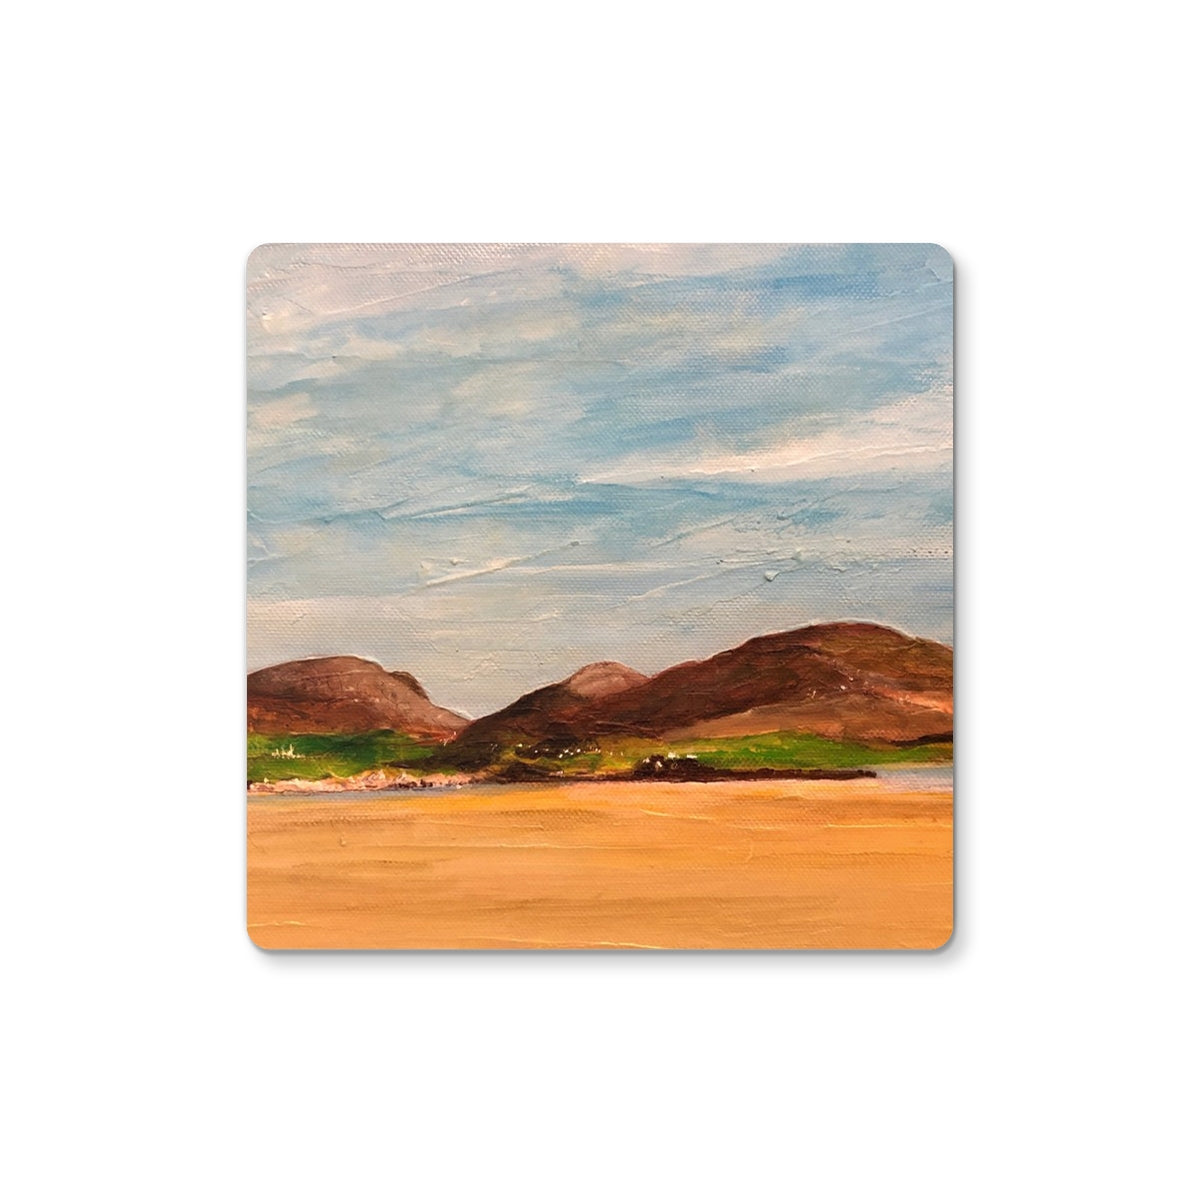 Uig Sands Lewis Art Gifts Coaster-Coasters-Hebridean Islands Art Gallery-6 Coasters-Paintings, Prints, Homeware, Art Gifts From Scotland By Scottish Artist Kevin Hunter